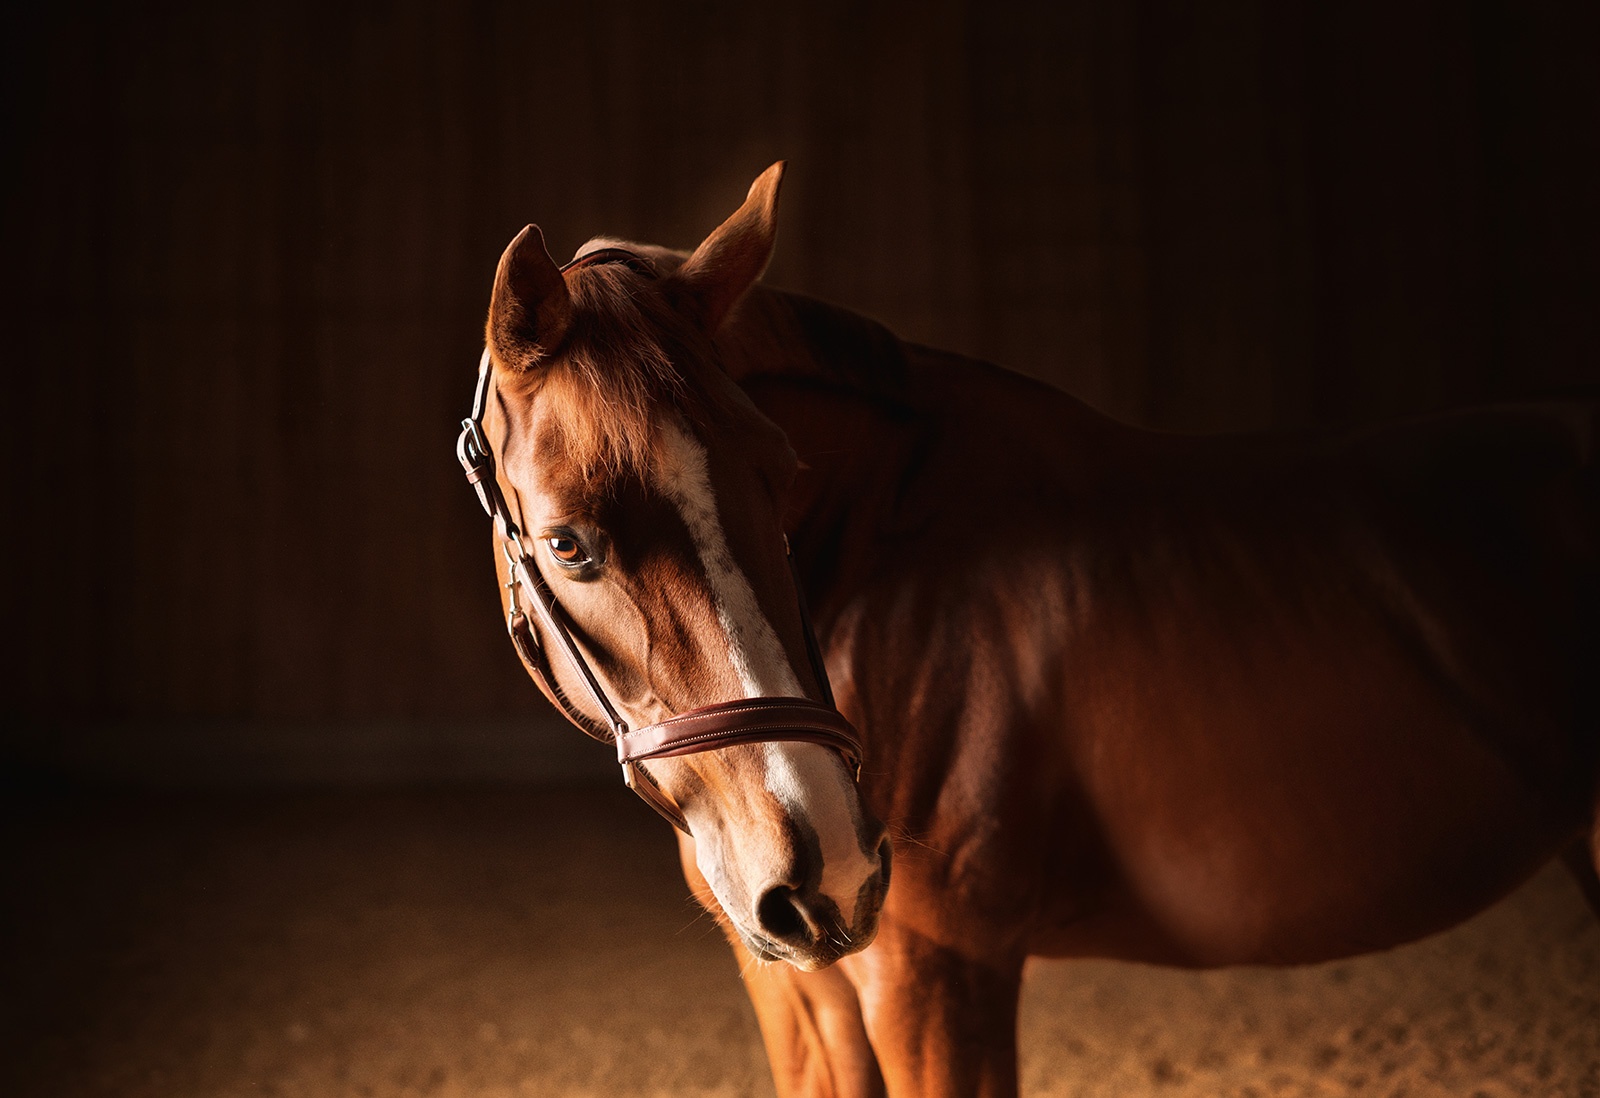 Blood Circulation Impacts Your Horse's Health How?